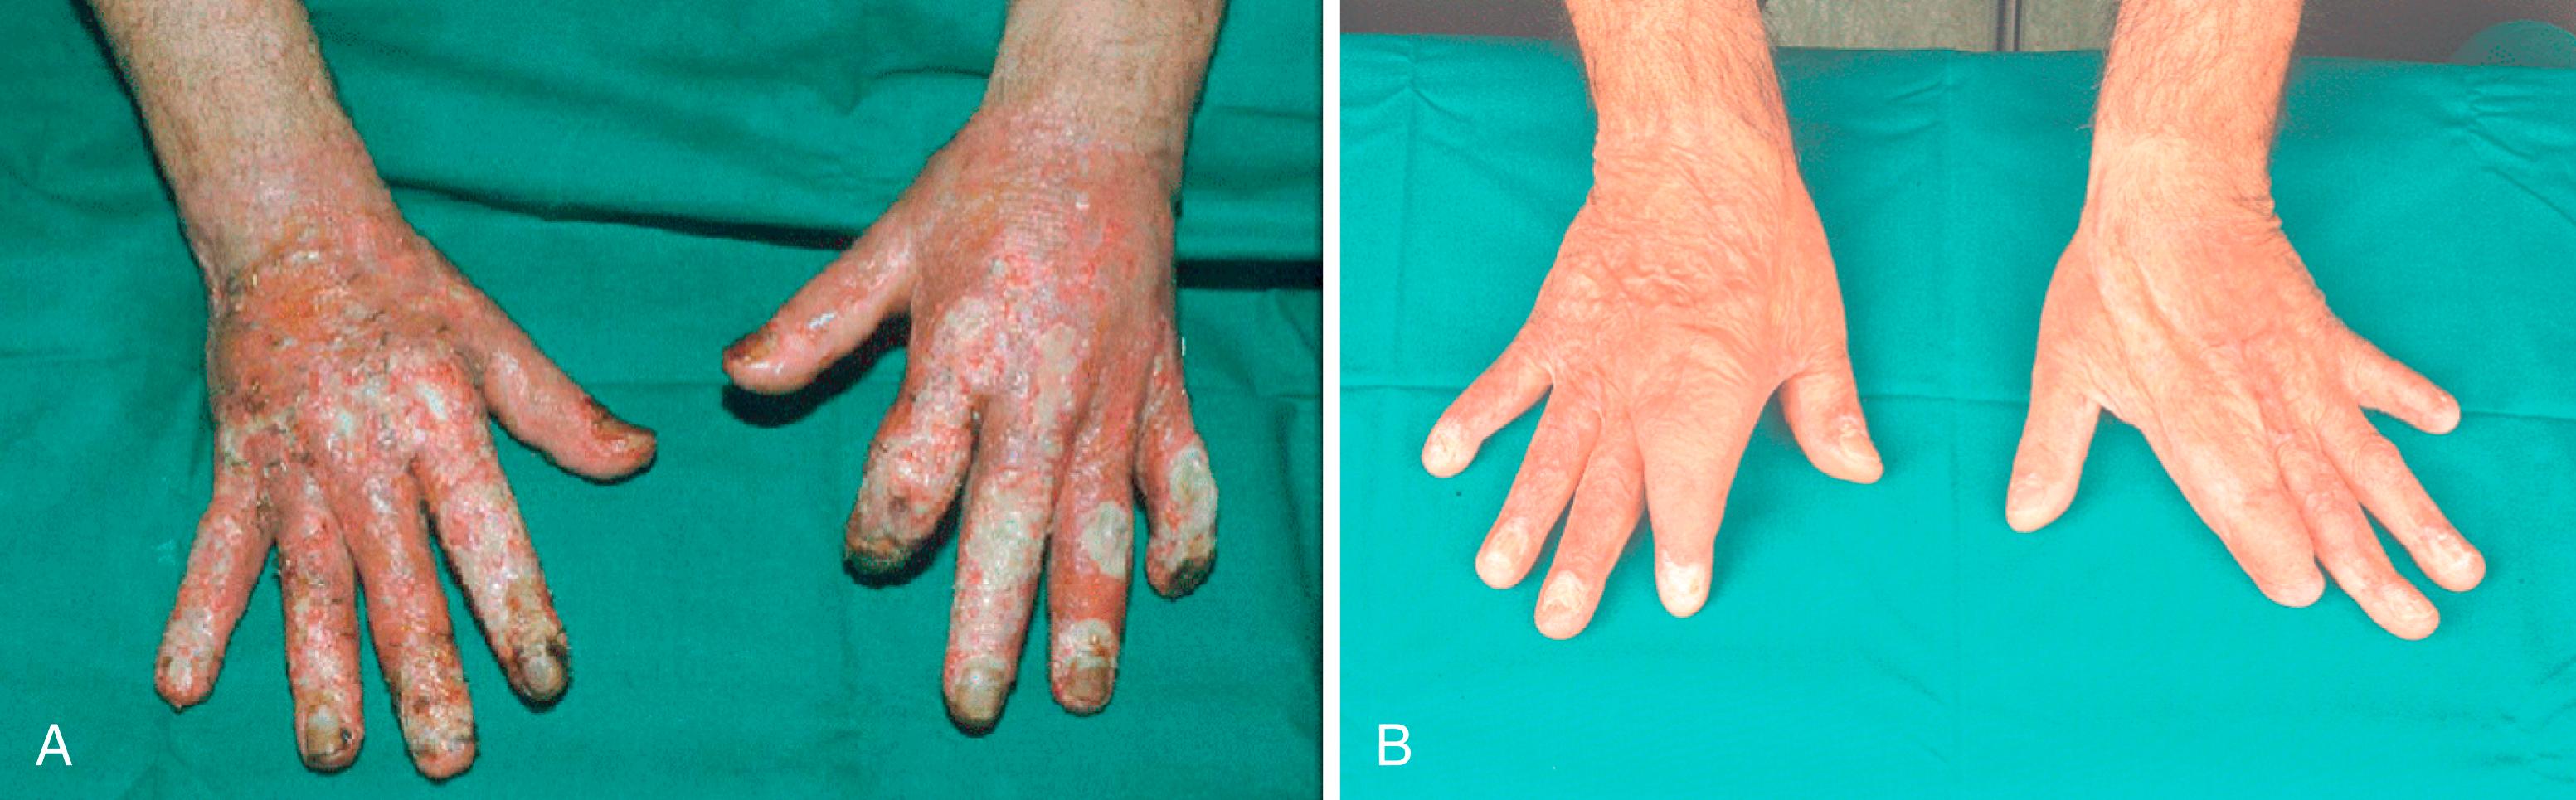 Fig. 57.15, A, Deep contact burn on both hands with exposed PIP joints after failed skin grafts. B, Result after the application of free serratus fascia flaps to both hands with skin grafts.